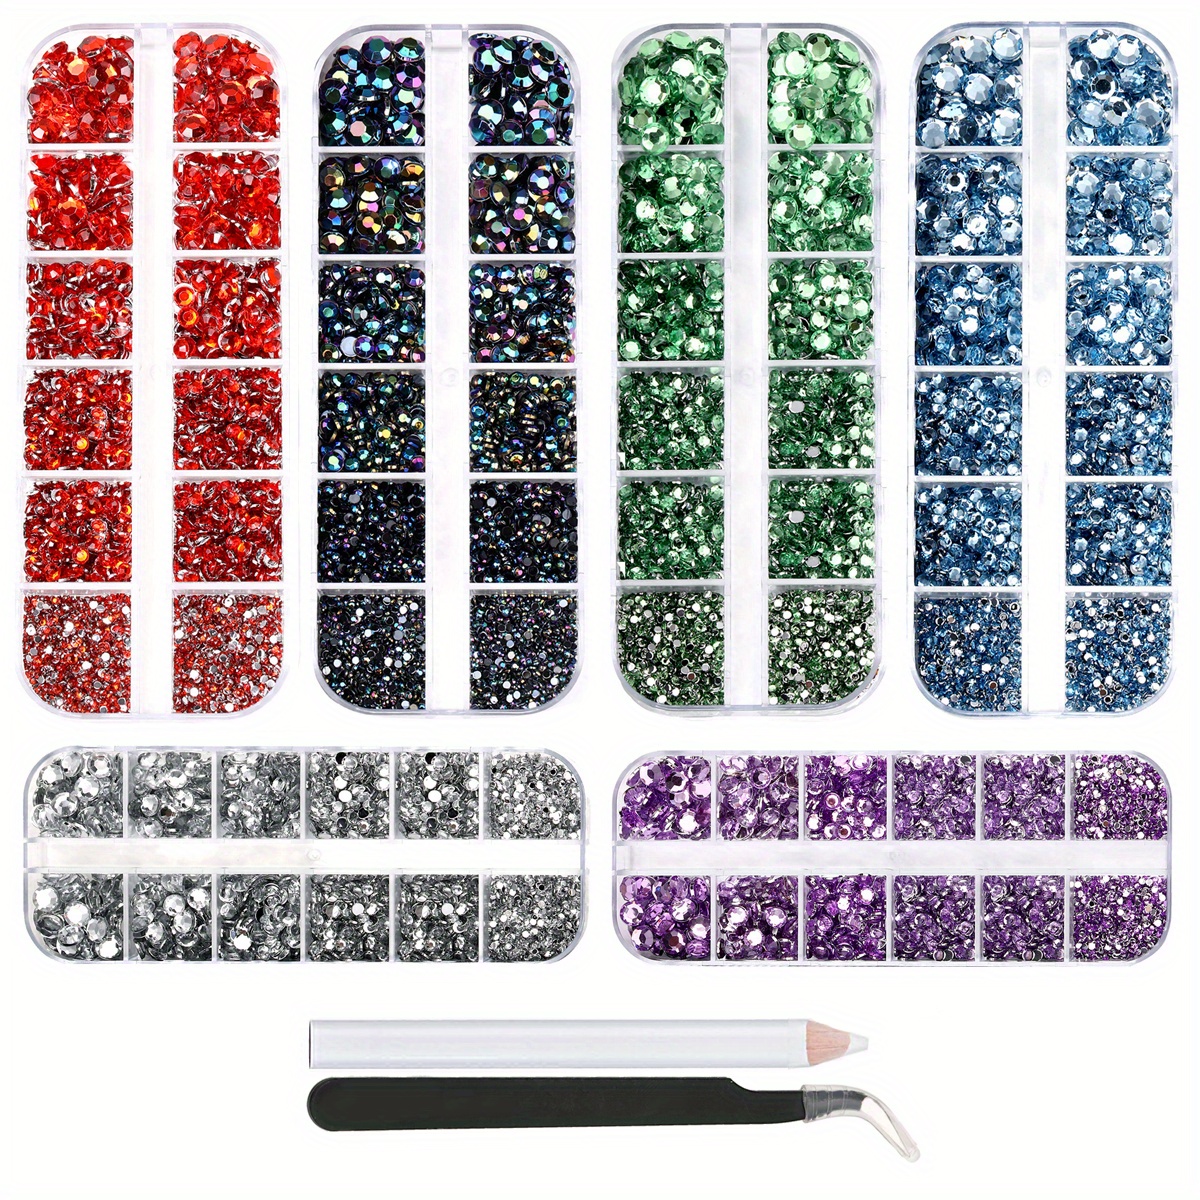 

6 Box Set About Flat-back Crystal Rhinestones In 5 Sizes - Includes Pick-up Tweezer & Picking Pen For Crafts, Nail Art, Clothes, Shoes, Bags & Diy Projects